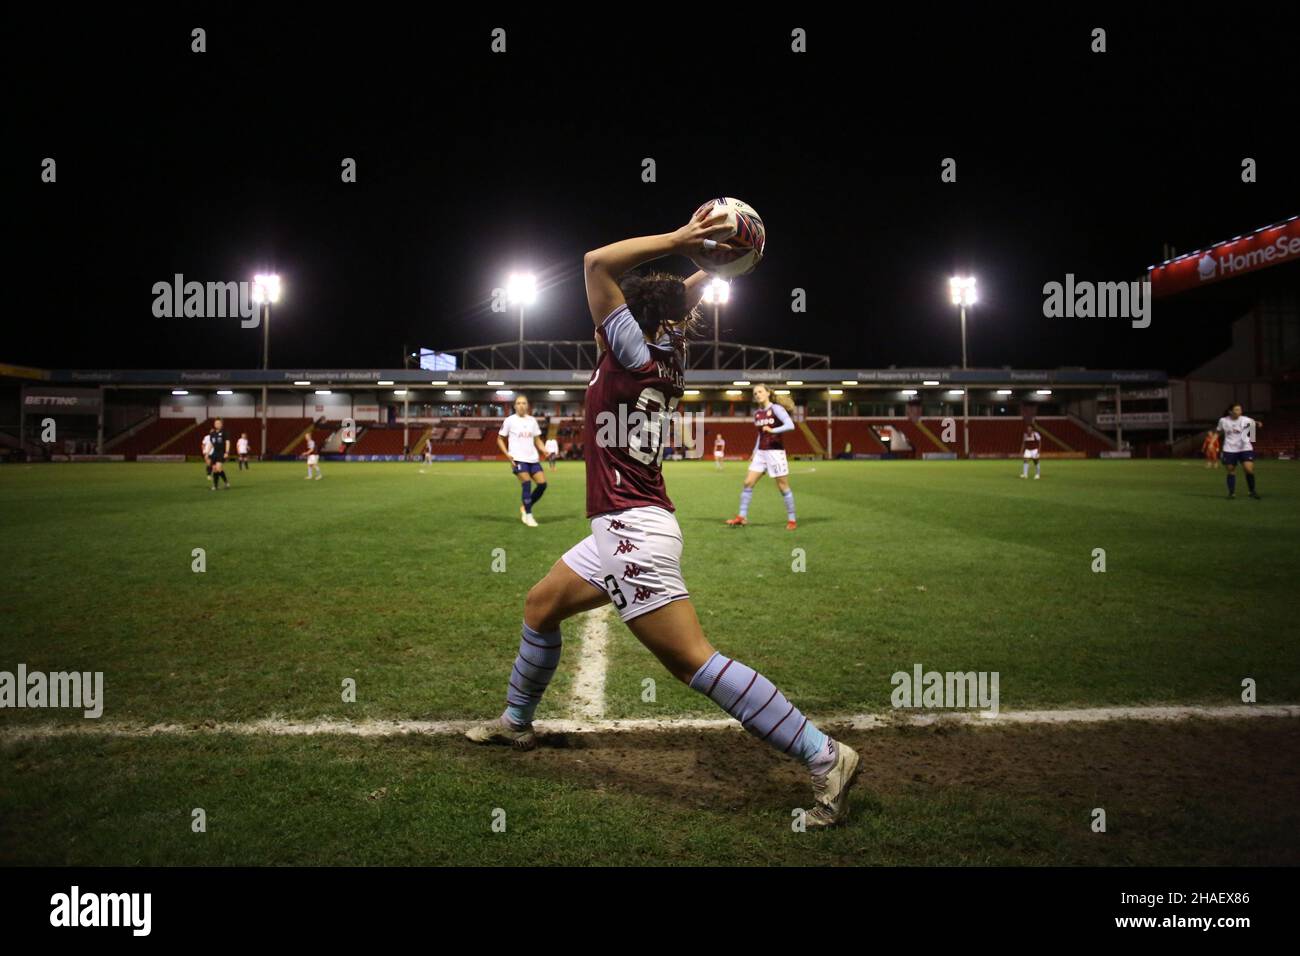 Walsall, UK. 12th Dec, 2021. Bescot Stadium Mayumi Pachecho (#33 Aston Villa) pictured taking a thow in during the FA Women's Super League game between Aston Villa and Tottenham Hotspur at Bescot Stadium in Walsall, England on December 12, 2021. Kieran Riley Credit: SPP Sport Press Photo. /Alamy Live News Stock Photo